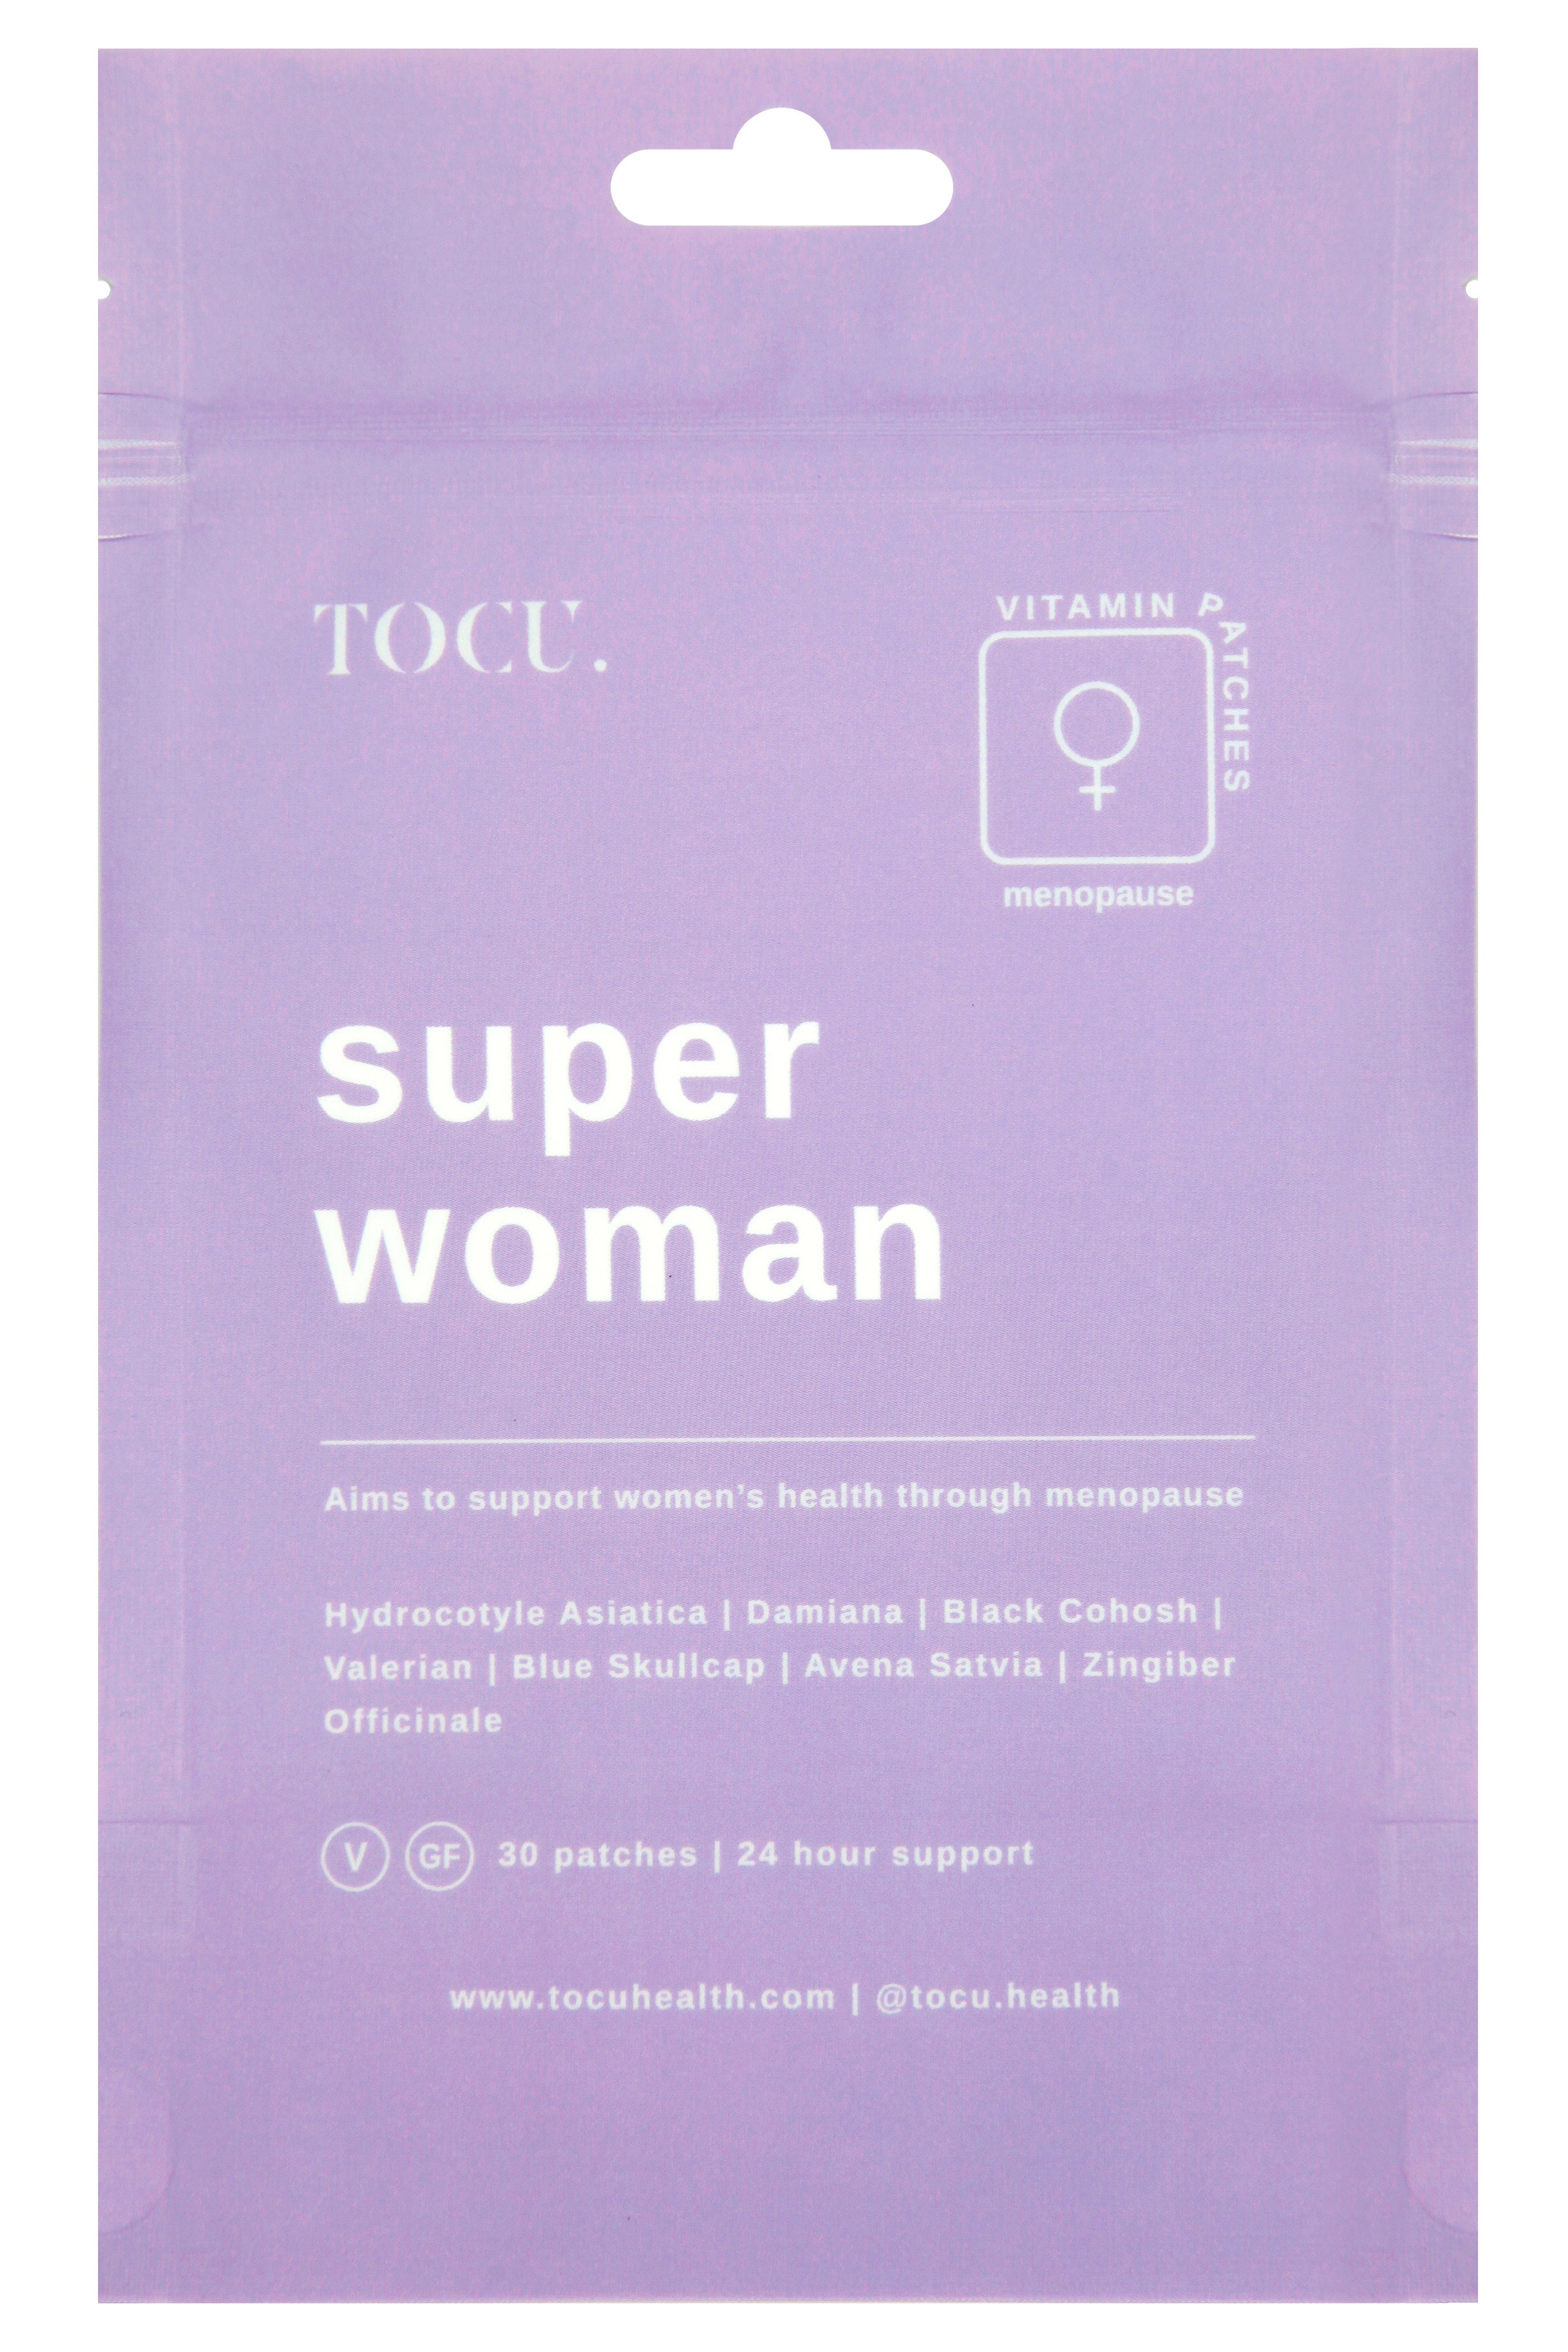 TOCU SUPER WOMAN MENOPAUSE VITAMIN PATCHES - 30 patches